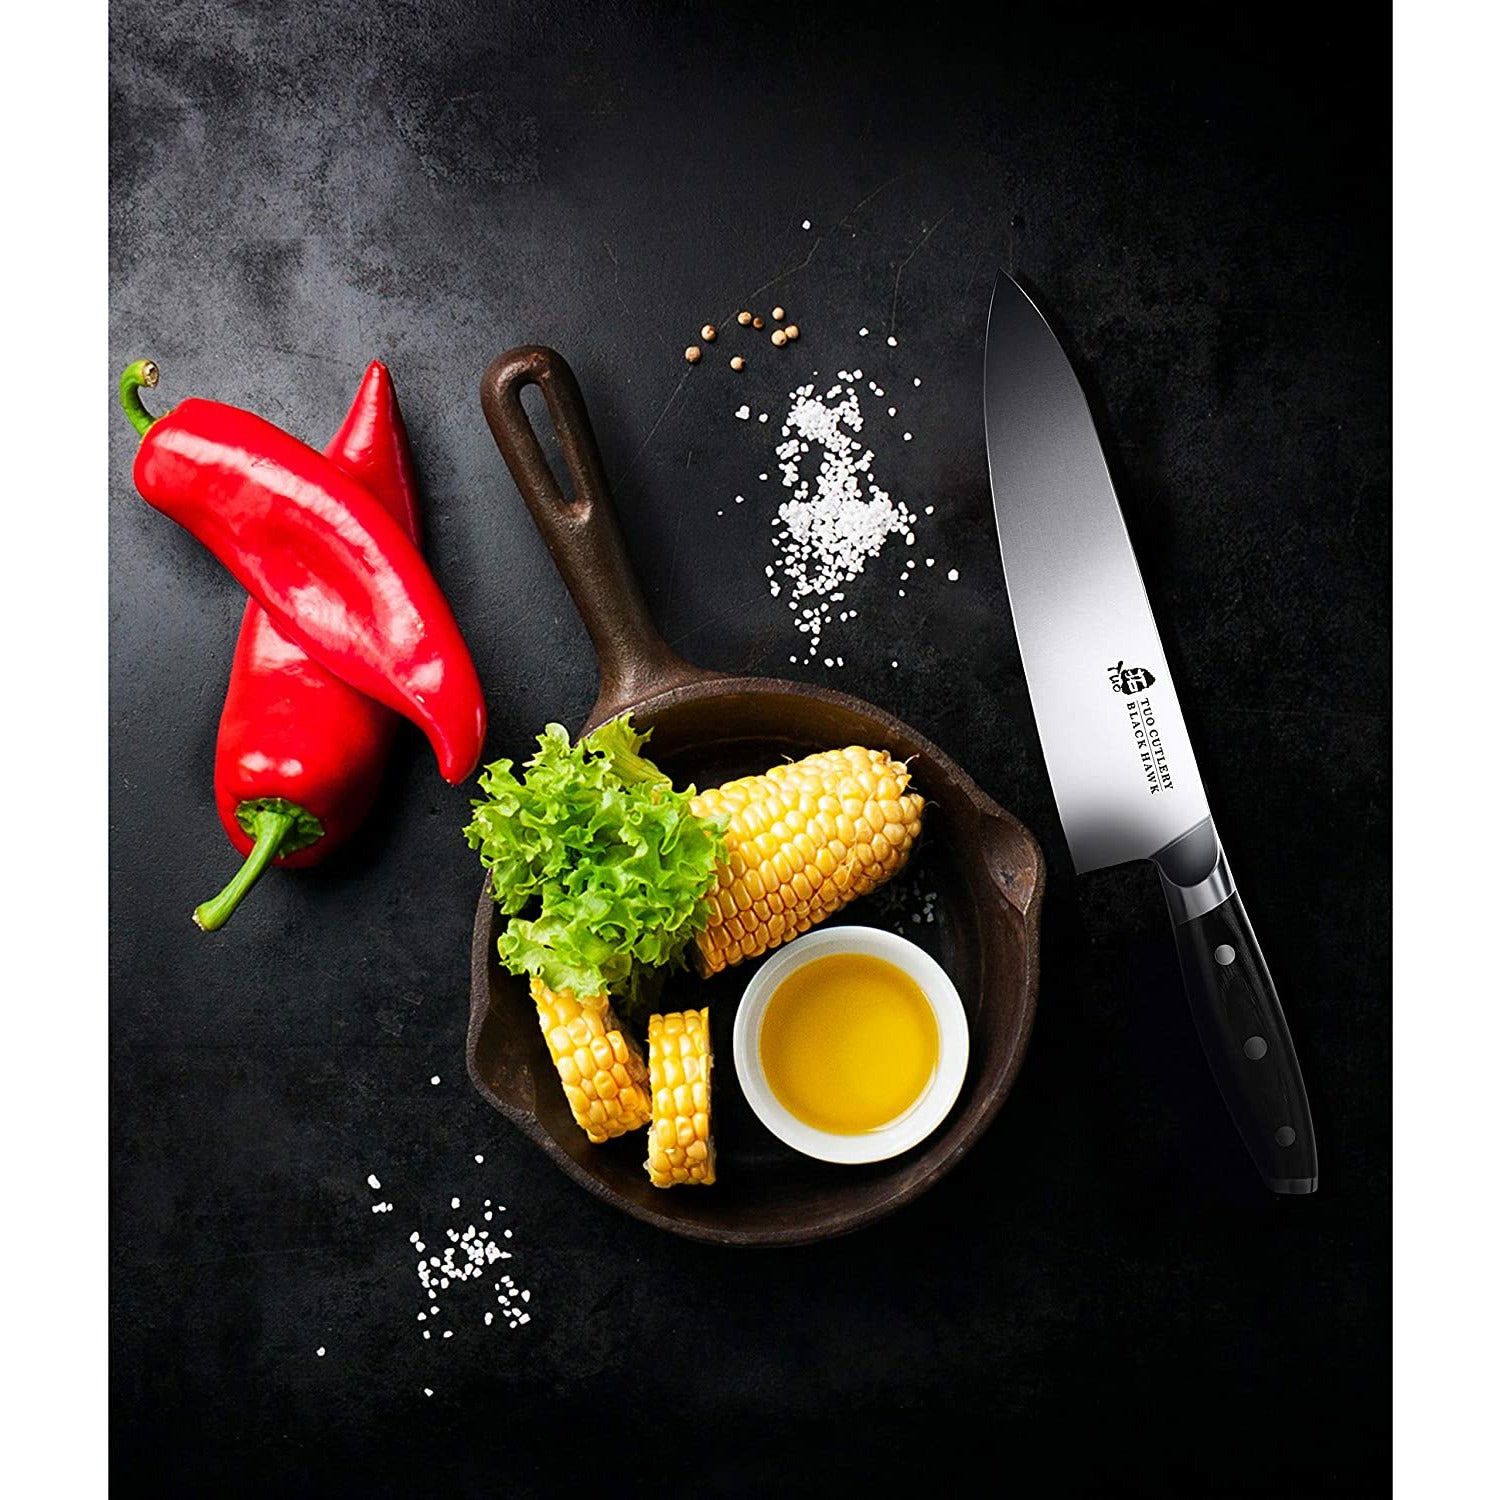 TUO 8 inch Chef Knife, Super Sharp Kitchen Knife, German HC Stainless  Steel, Ergonomic Pakkawood Handle, Full Tang with Gift Box